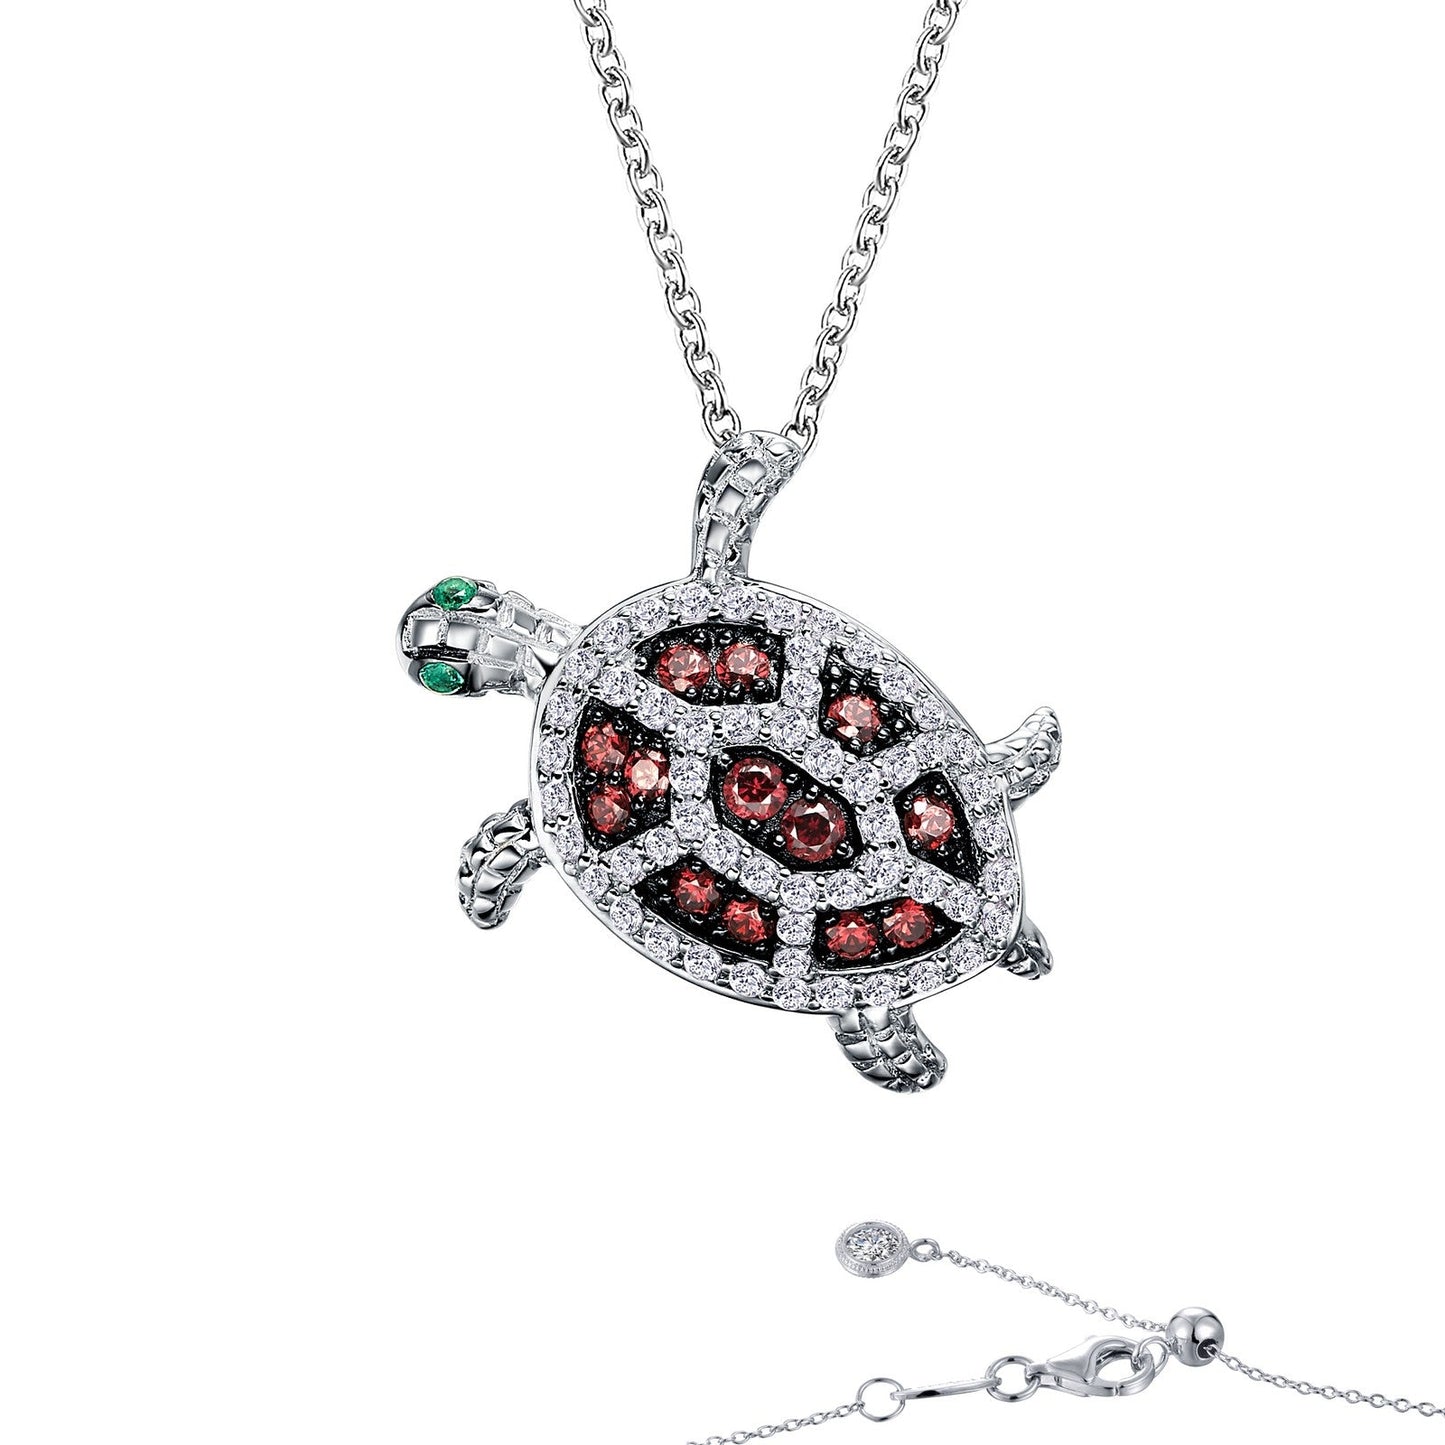 Lafonn Whimsical Sea Turtle Necklace 70 Stone Count N0156CCT22